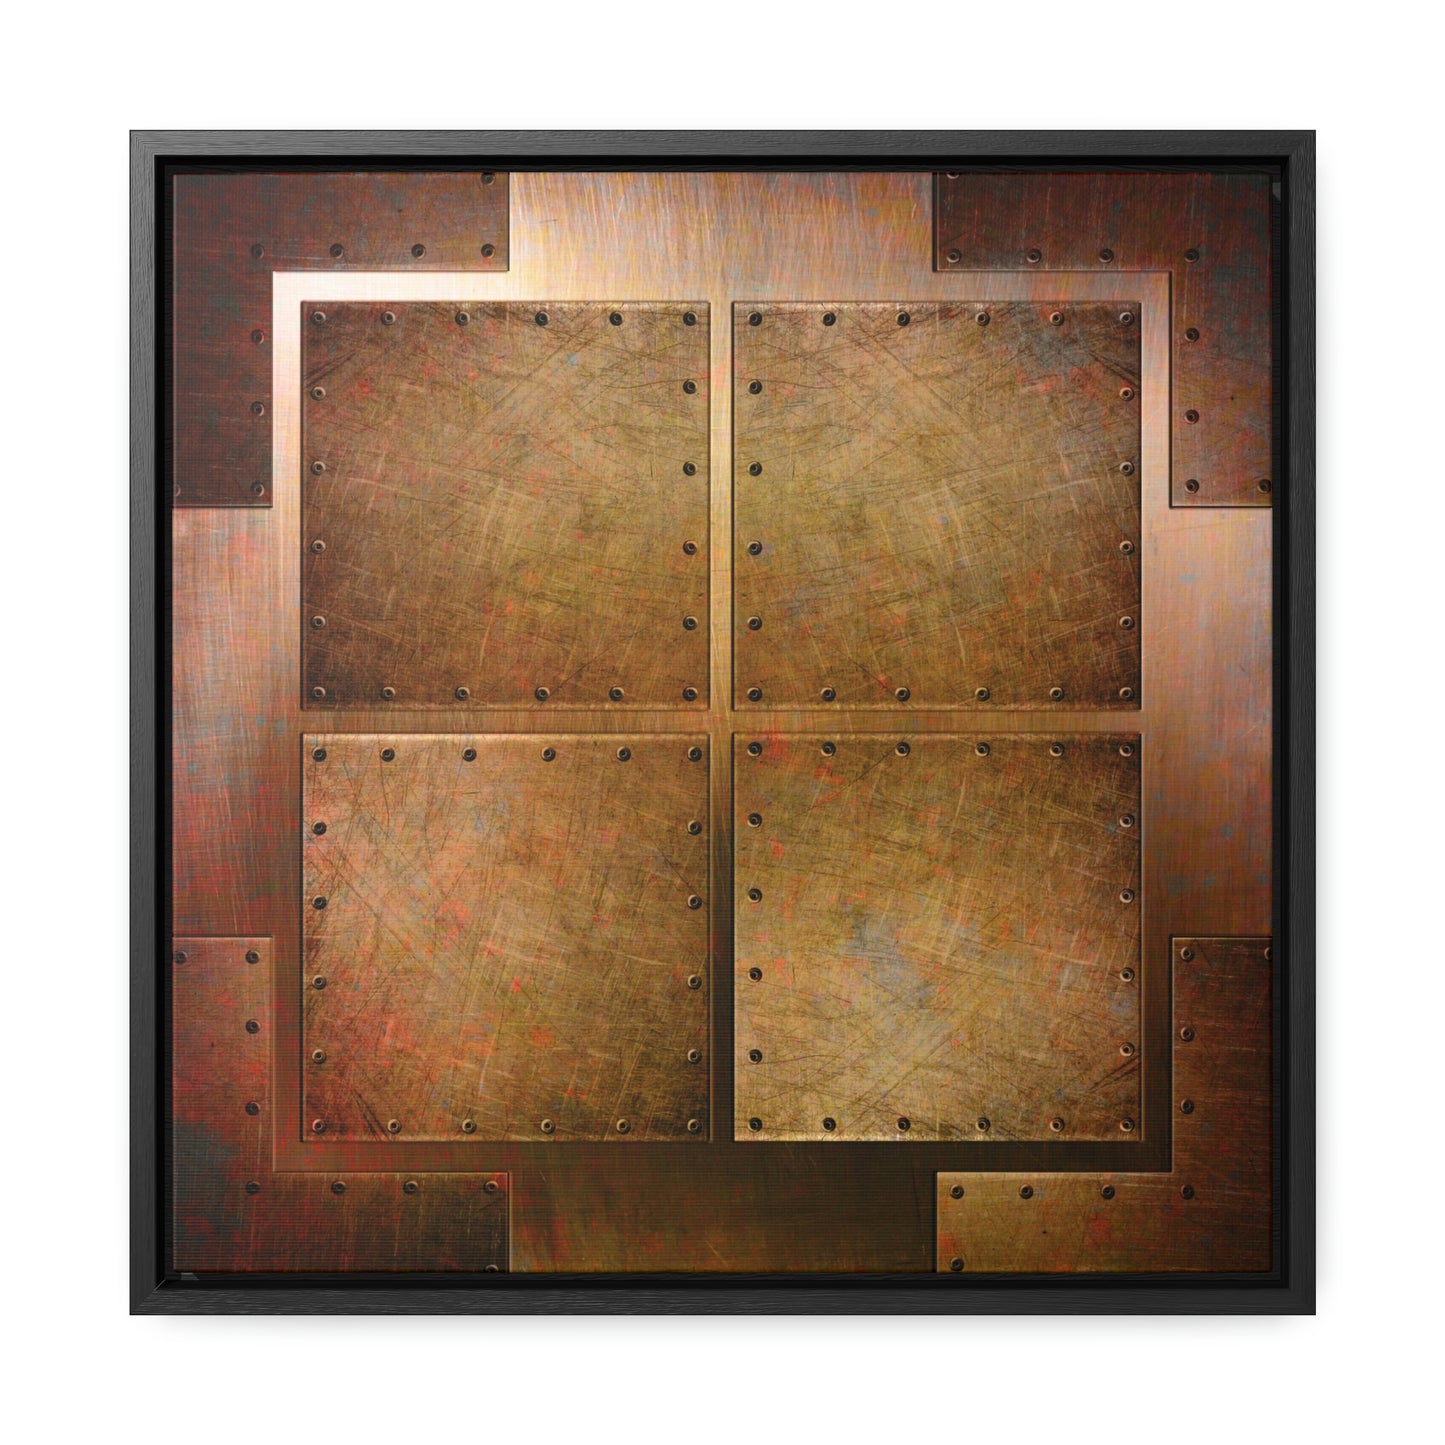 Steampunk Themed Framed Wall Art - Distressed, Riveted Copper Sheets Print on Canvas in a Floating Frame